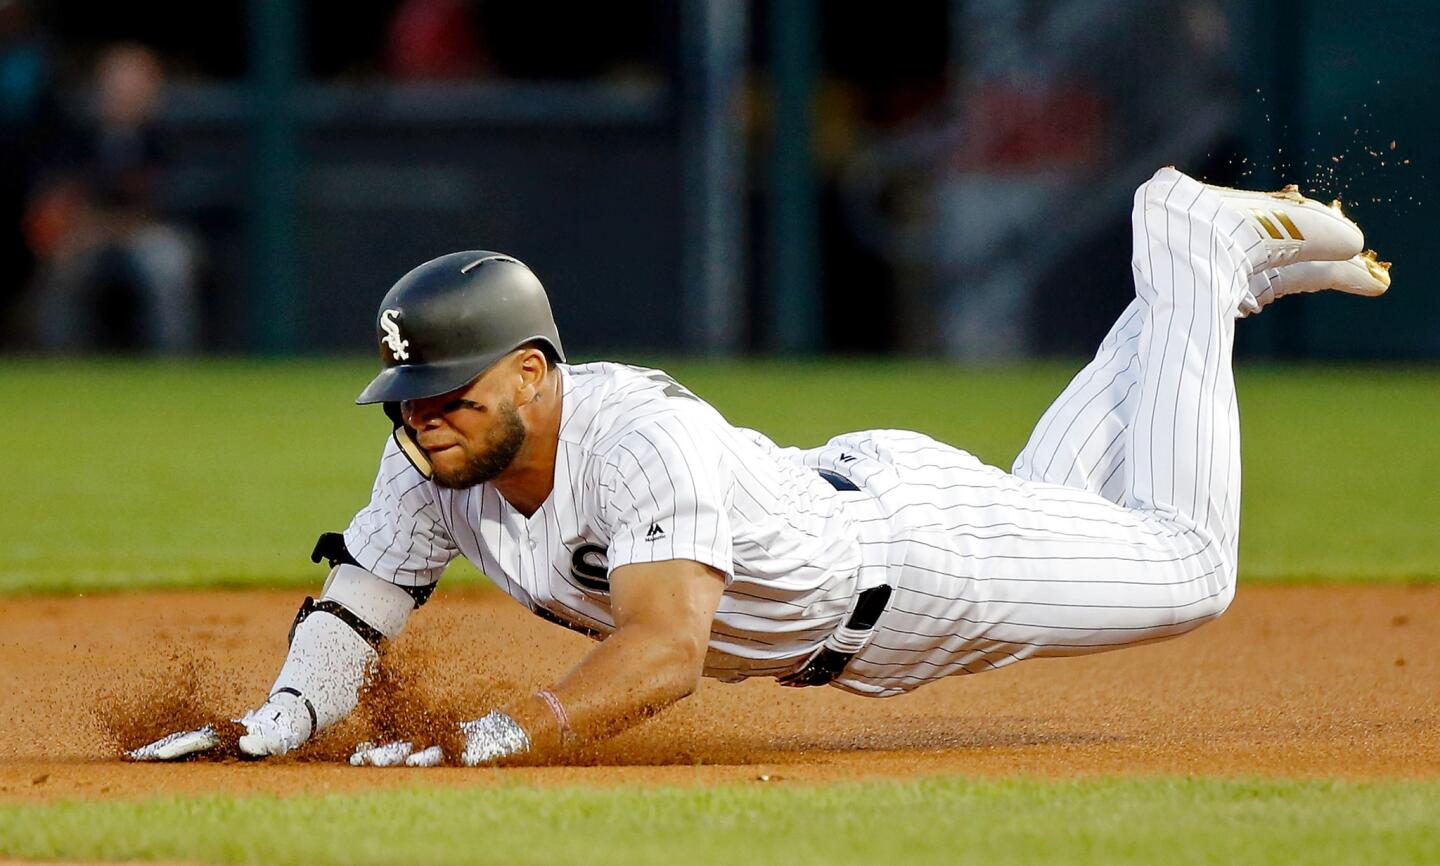 Yoan Moncada slides into second base for a double against the Twins during the first inning at Guaranteed Rate Field on Aug. 22, 2017.